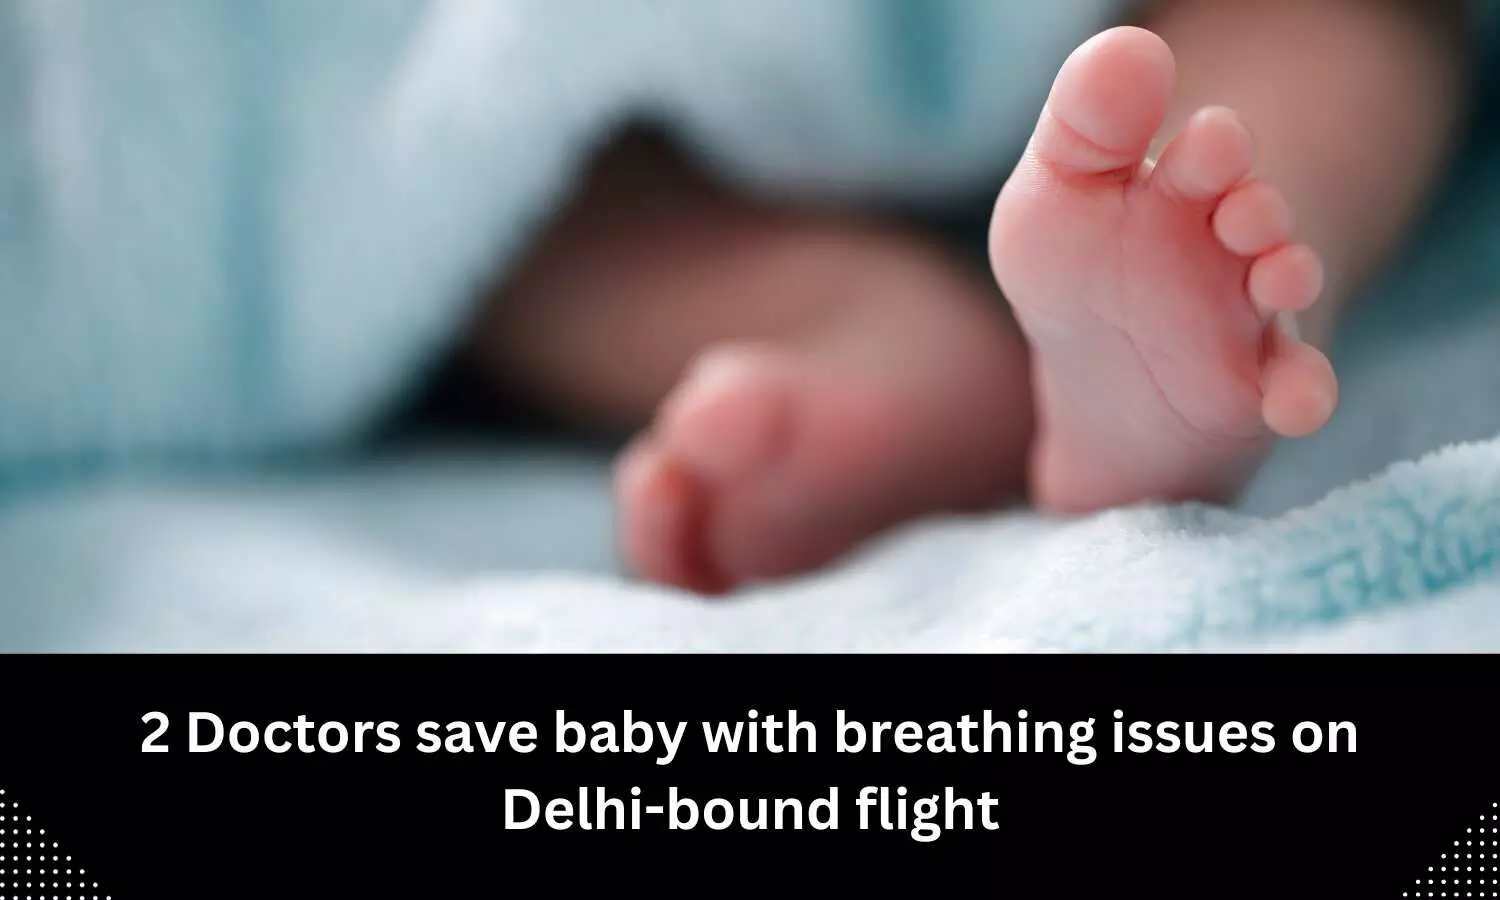 Baby with breathing issues on Delhi-bound flight saved by 2 doctors